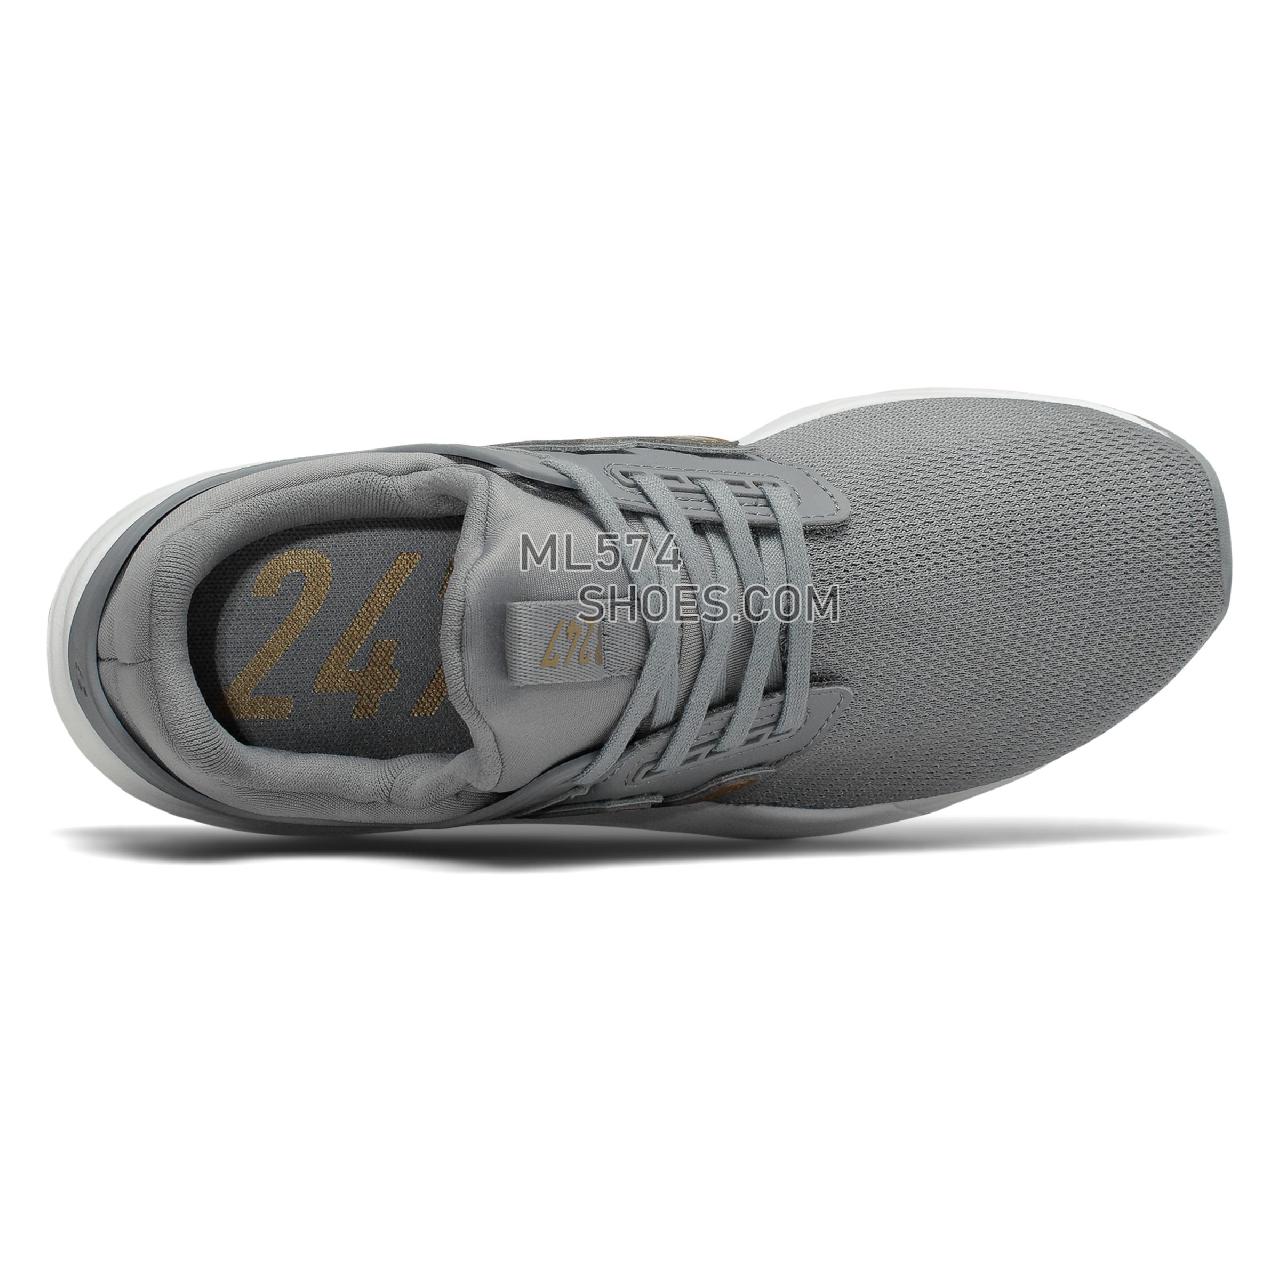 New Balance 247 - Women's Sport Style Sneakers - Gunmetal with Gold Metallic - WS247CNF